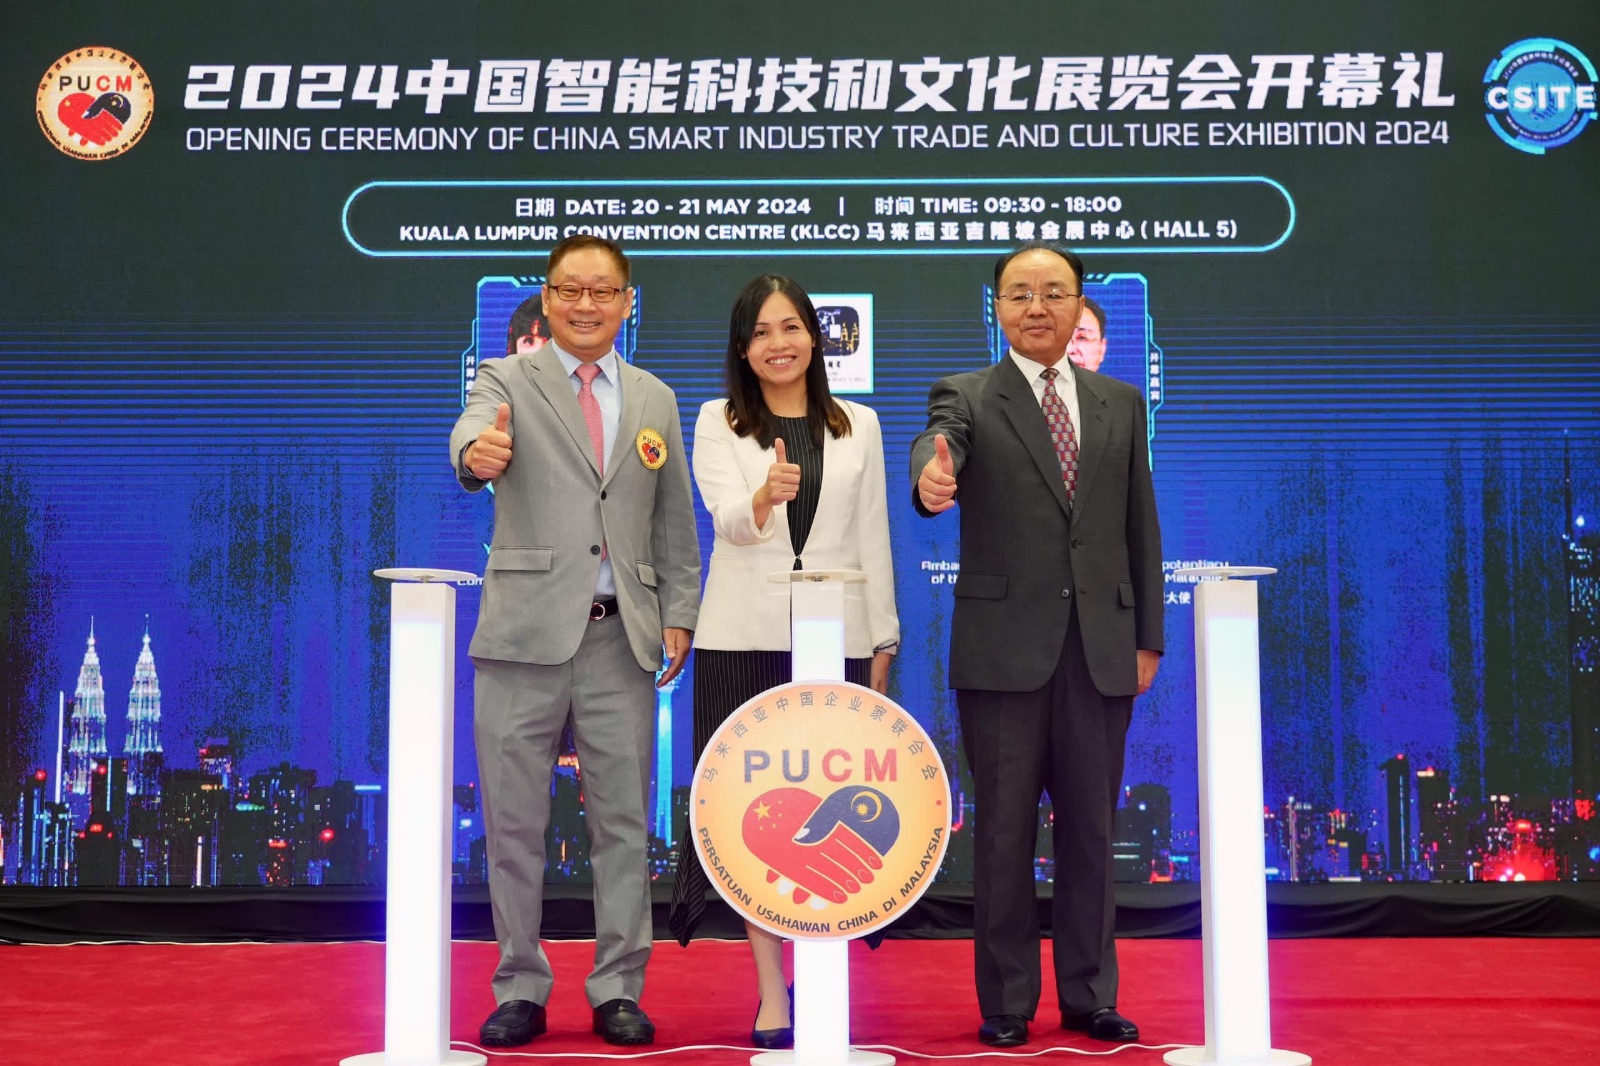 PUCM's 4th China Smart Industry Trade and Culture Exhibition held in Kuala Lumpur 